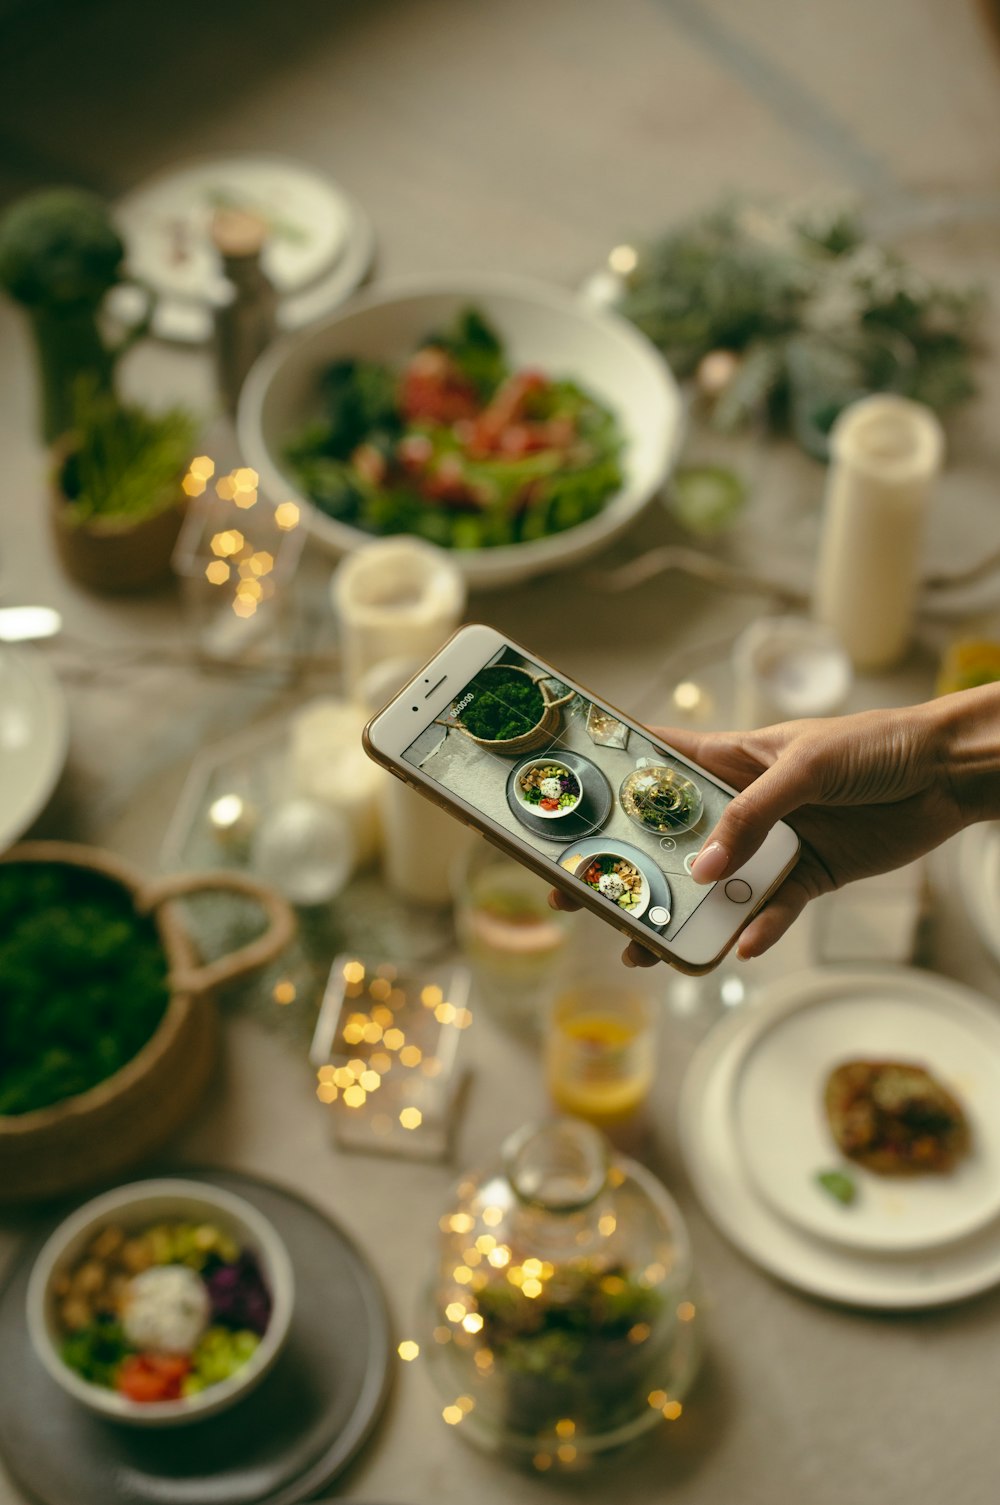 person taking picture of variety of food using phone